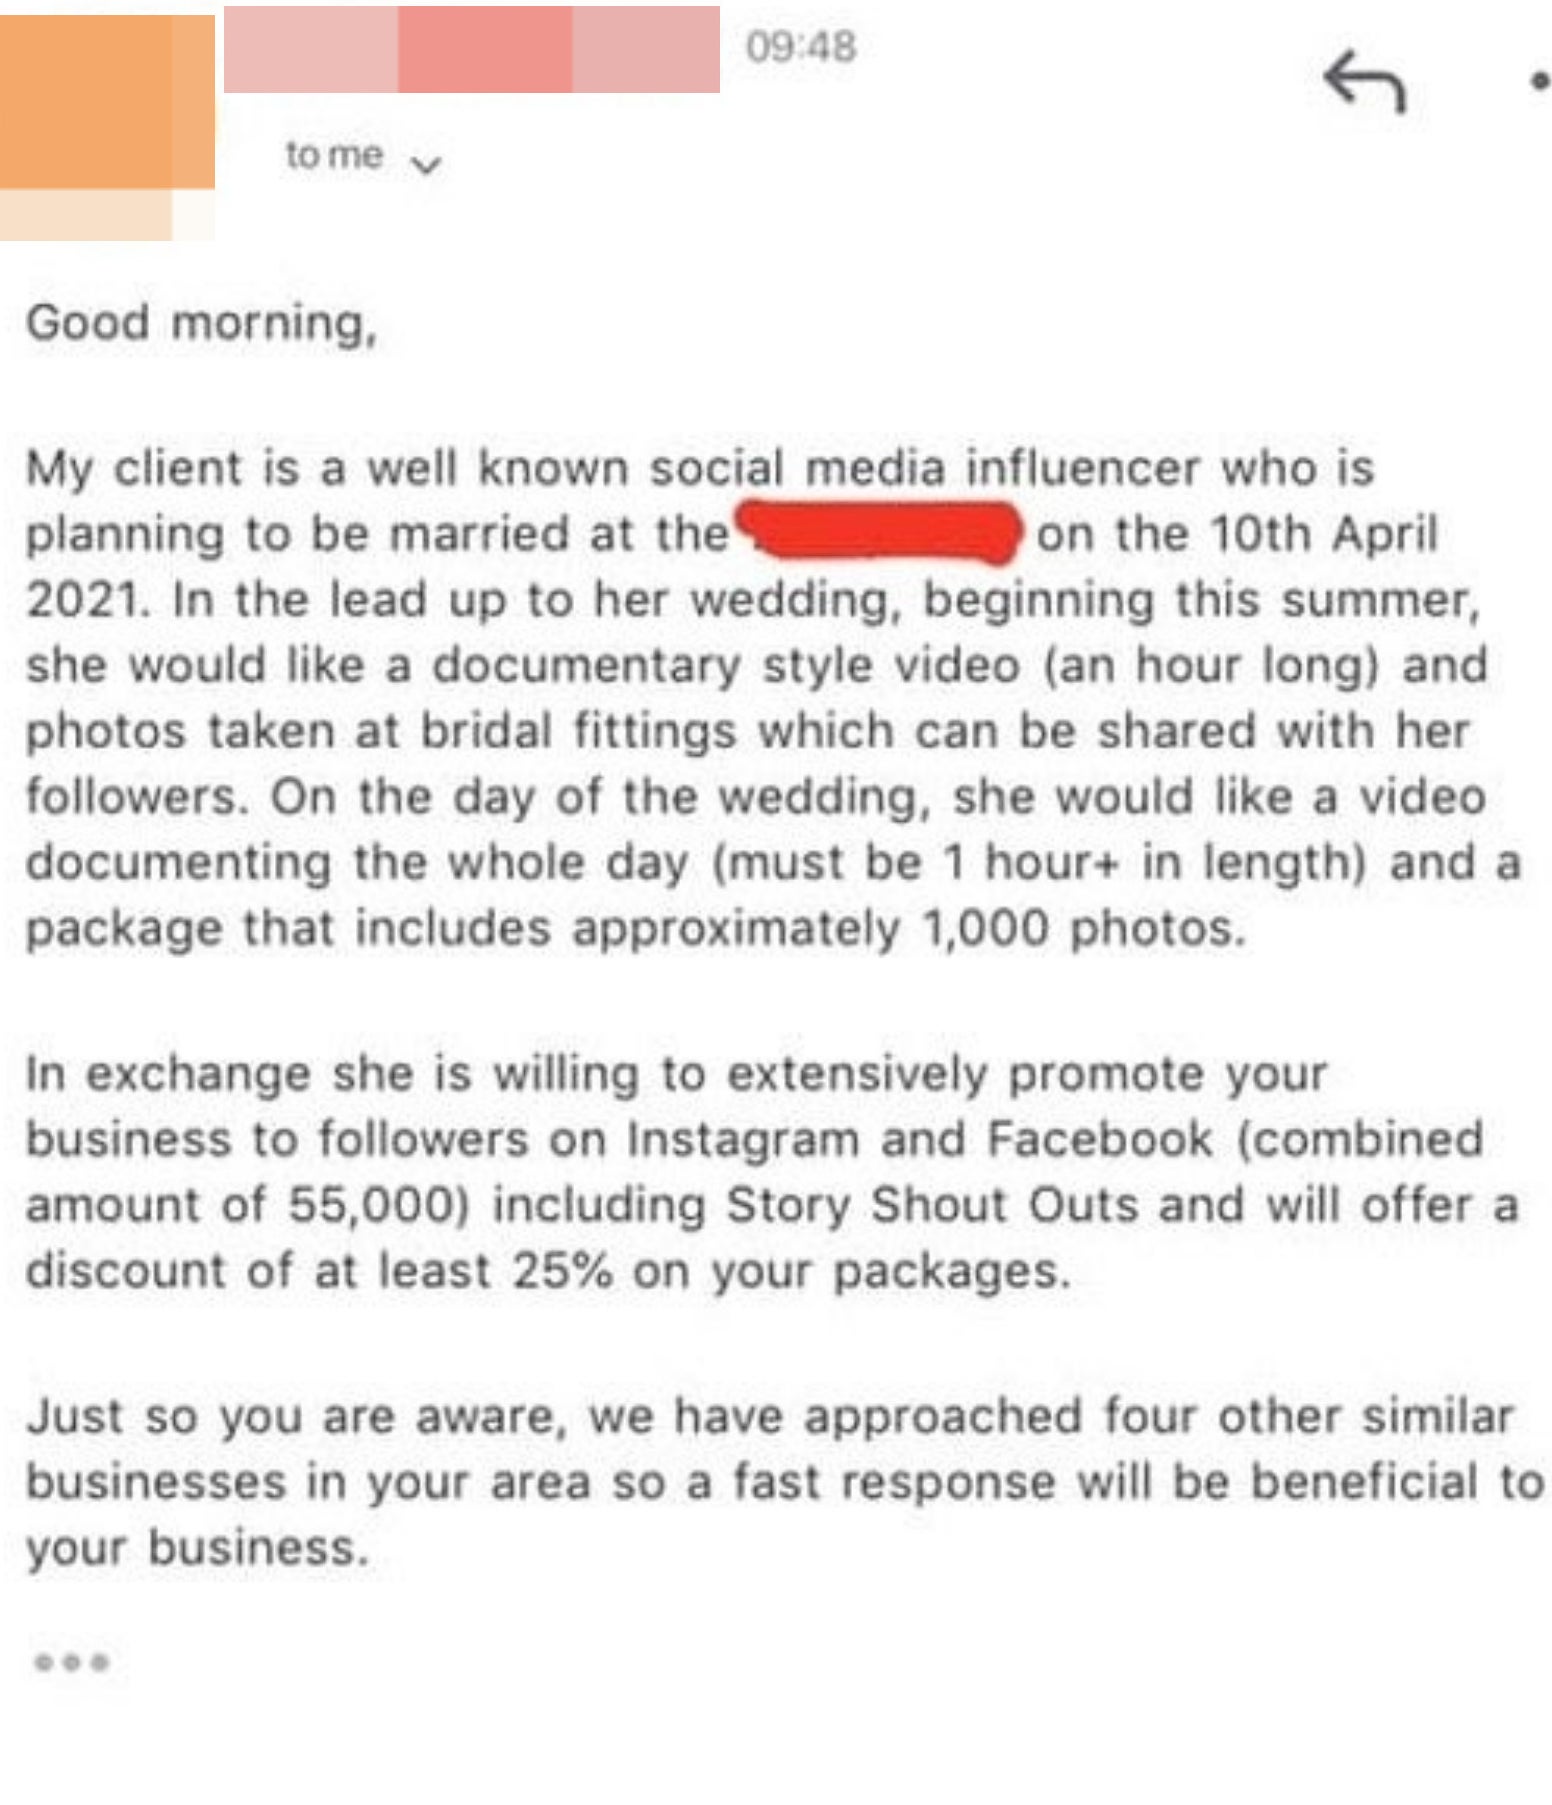 A person asking for photos in exchange for exposure, rather than paying them